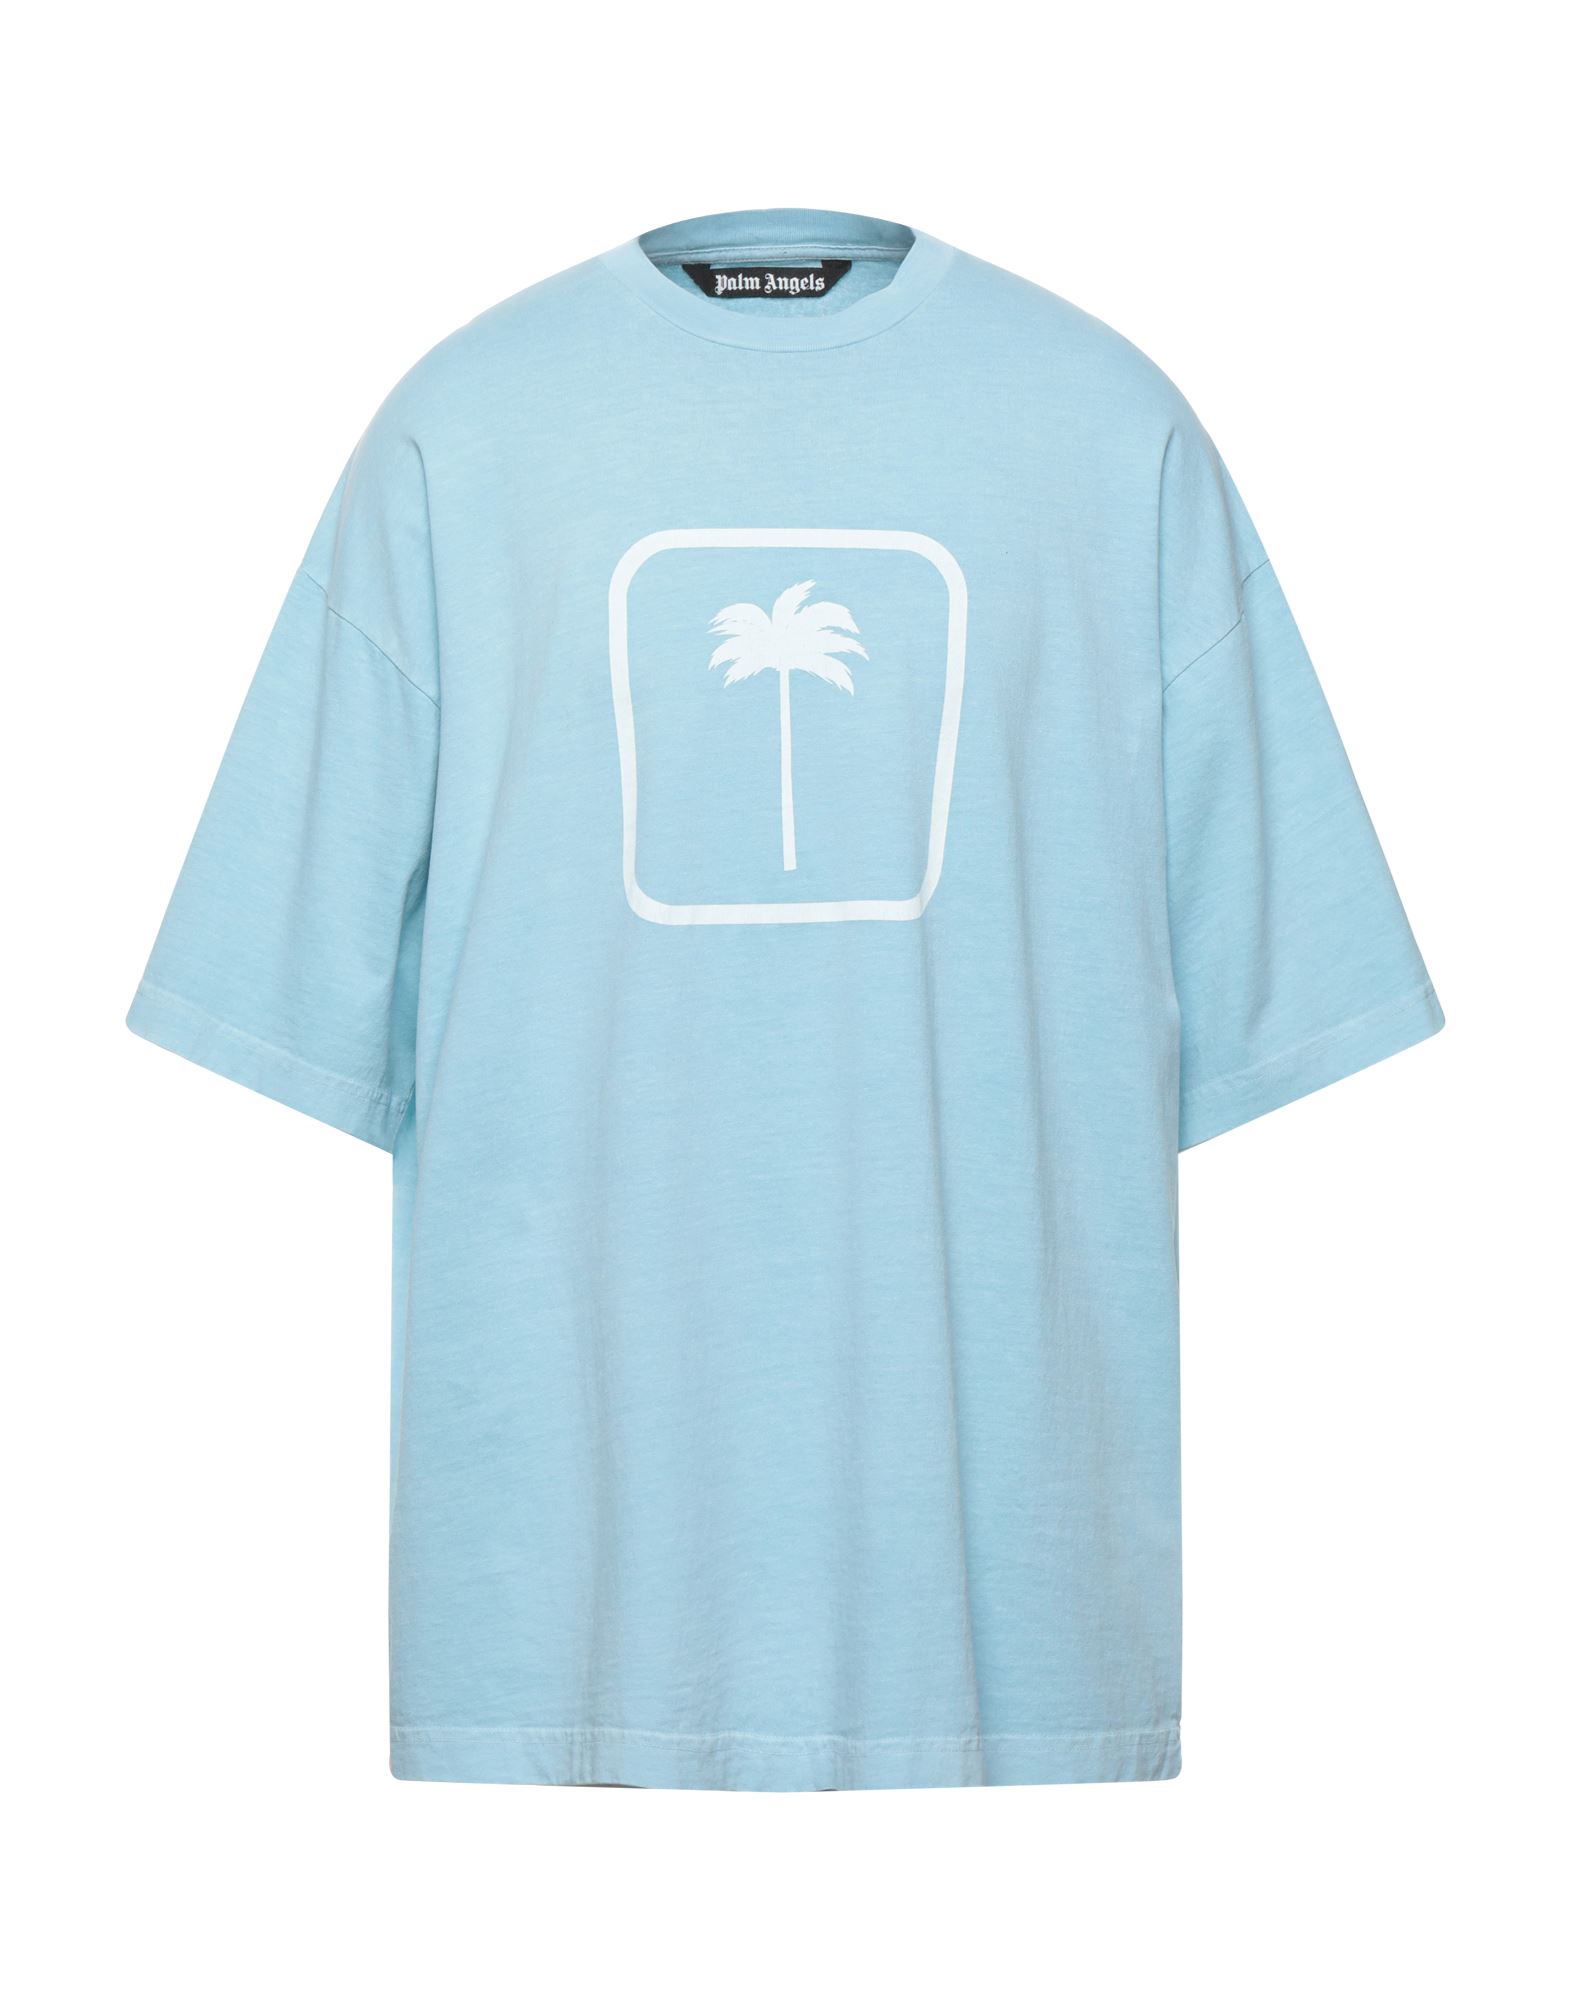 Palm Angels T-shirts In Blue